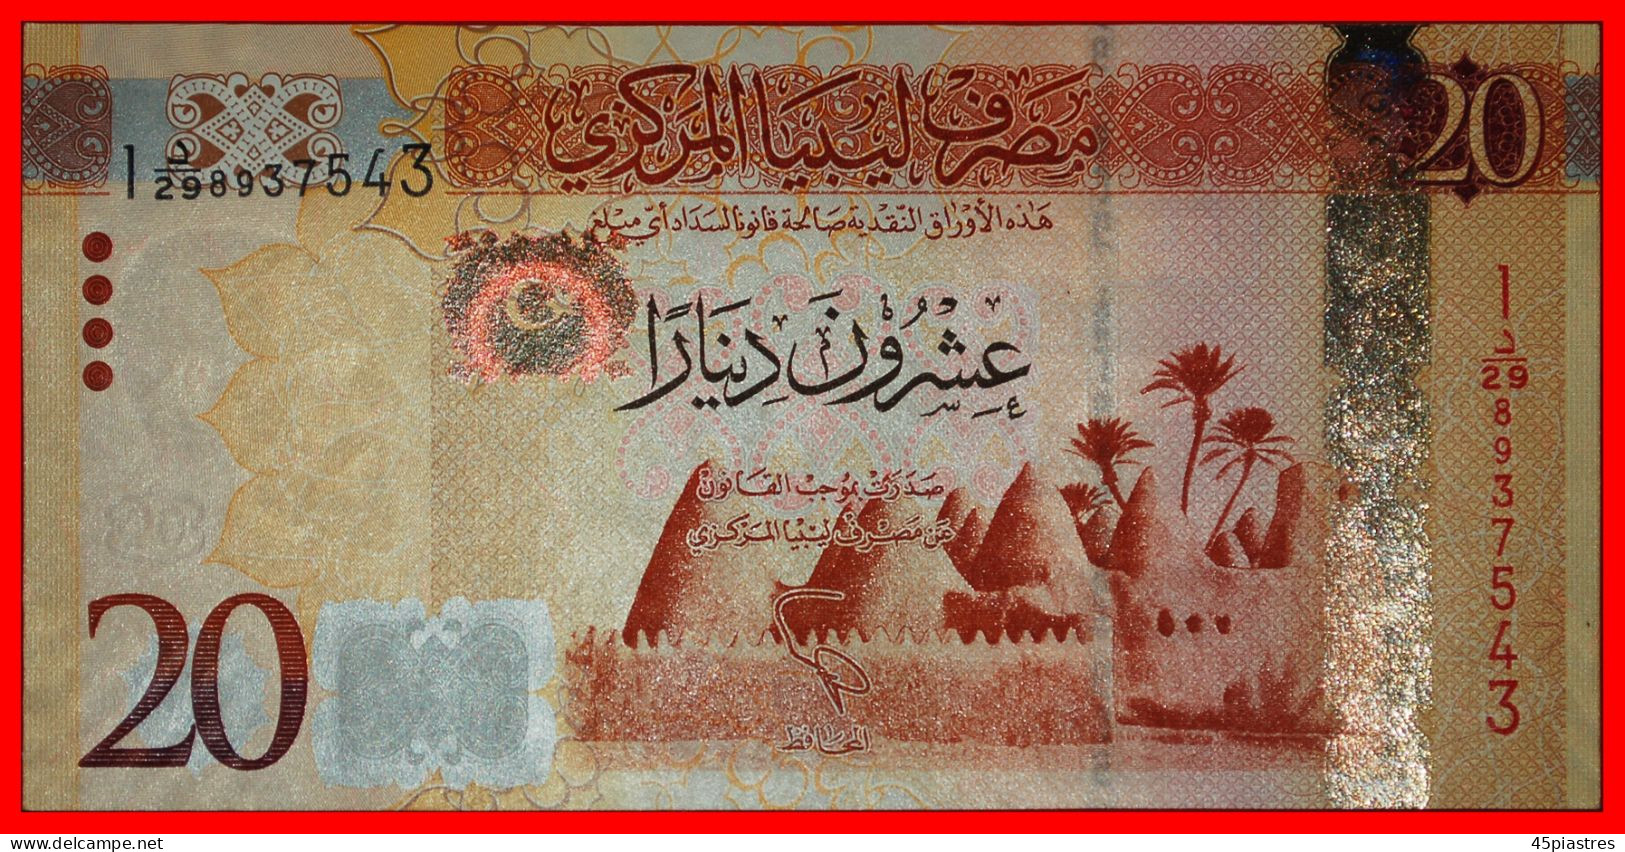 * Russia (the USSR), GREAT BRITAIN: LIBYA  20 DINARS (2013)! CRISP! JUST PUBLISHED!· LOW START!  NO RESERVE! - Libia